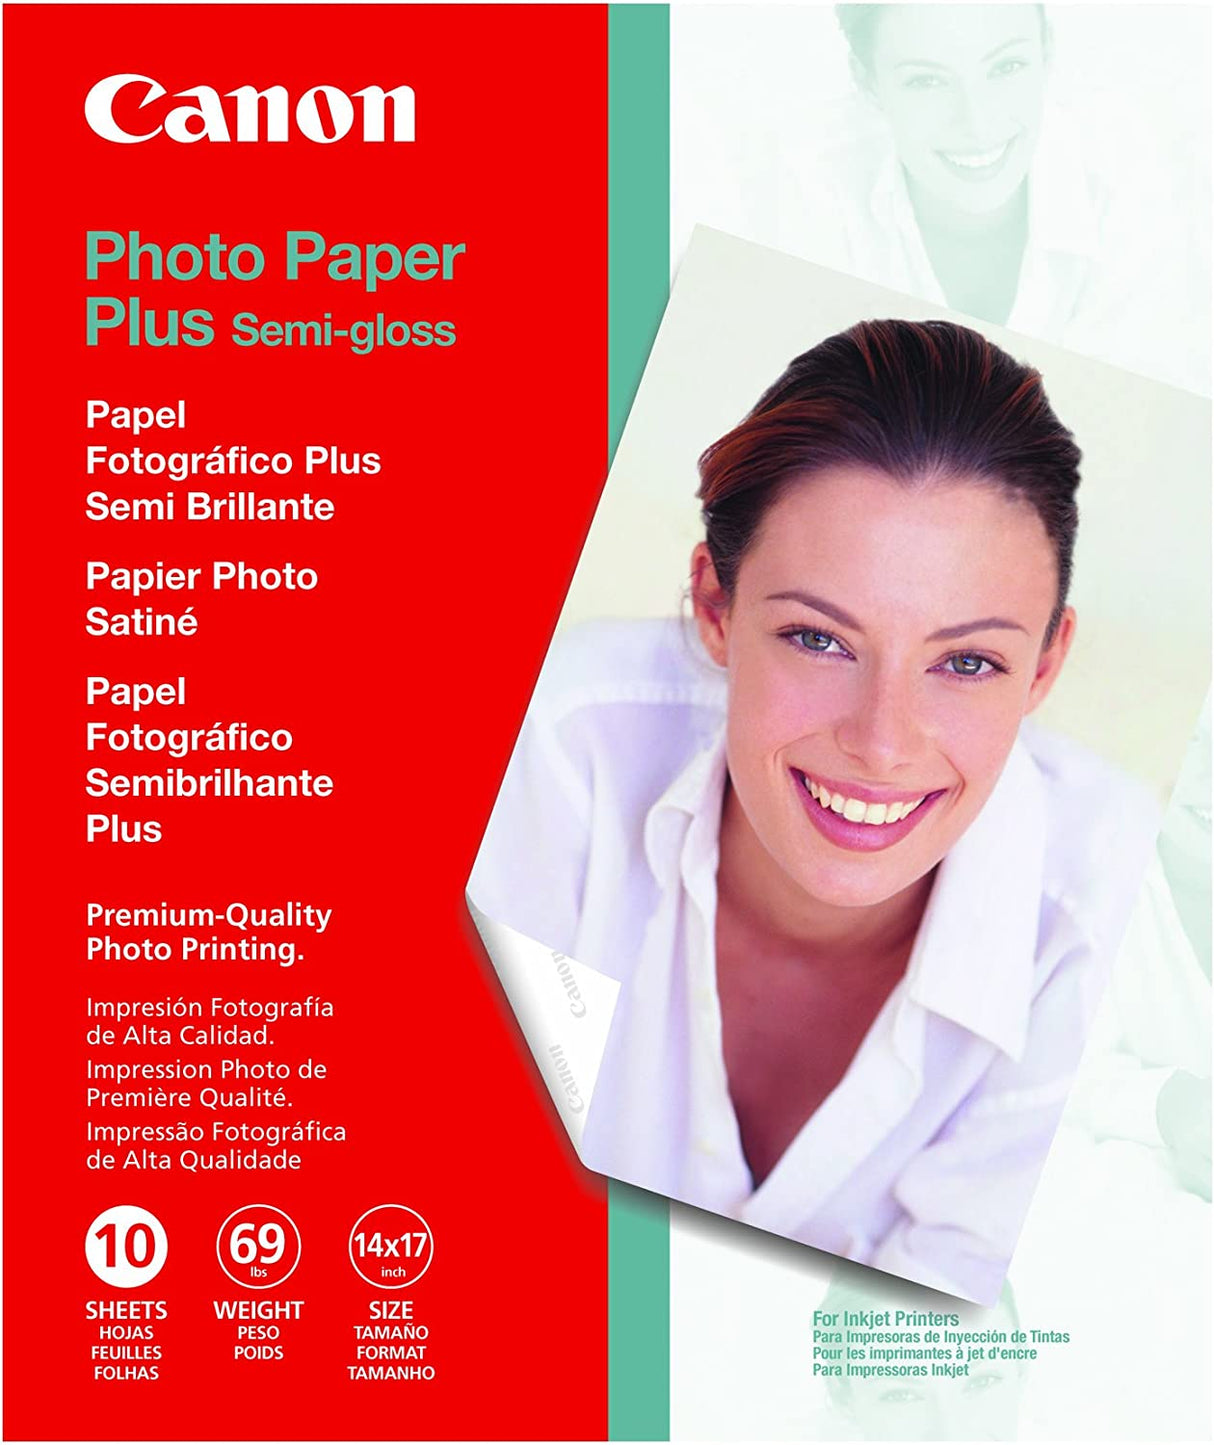 Genuine Canon SG-201, 14 x 17-Inch, Photo Paper Plus Semi-Gloss, 10 Sheets/Package 14"x17" 10 Sheets